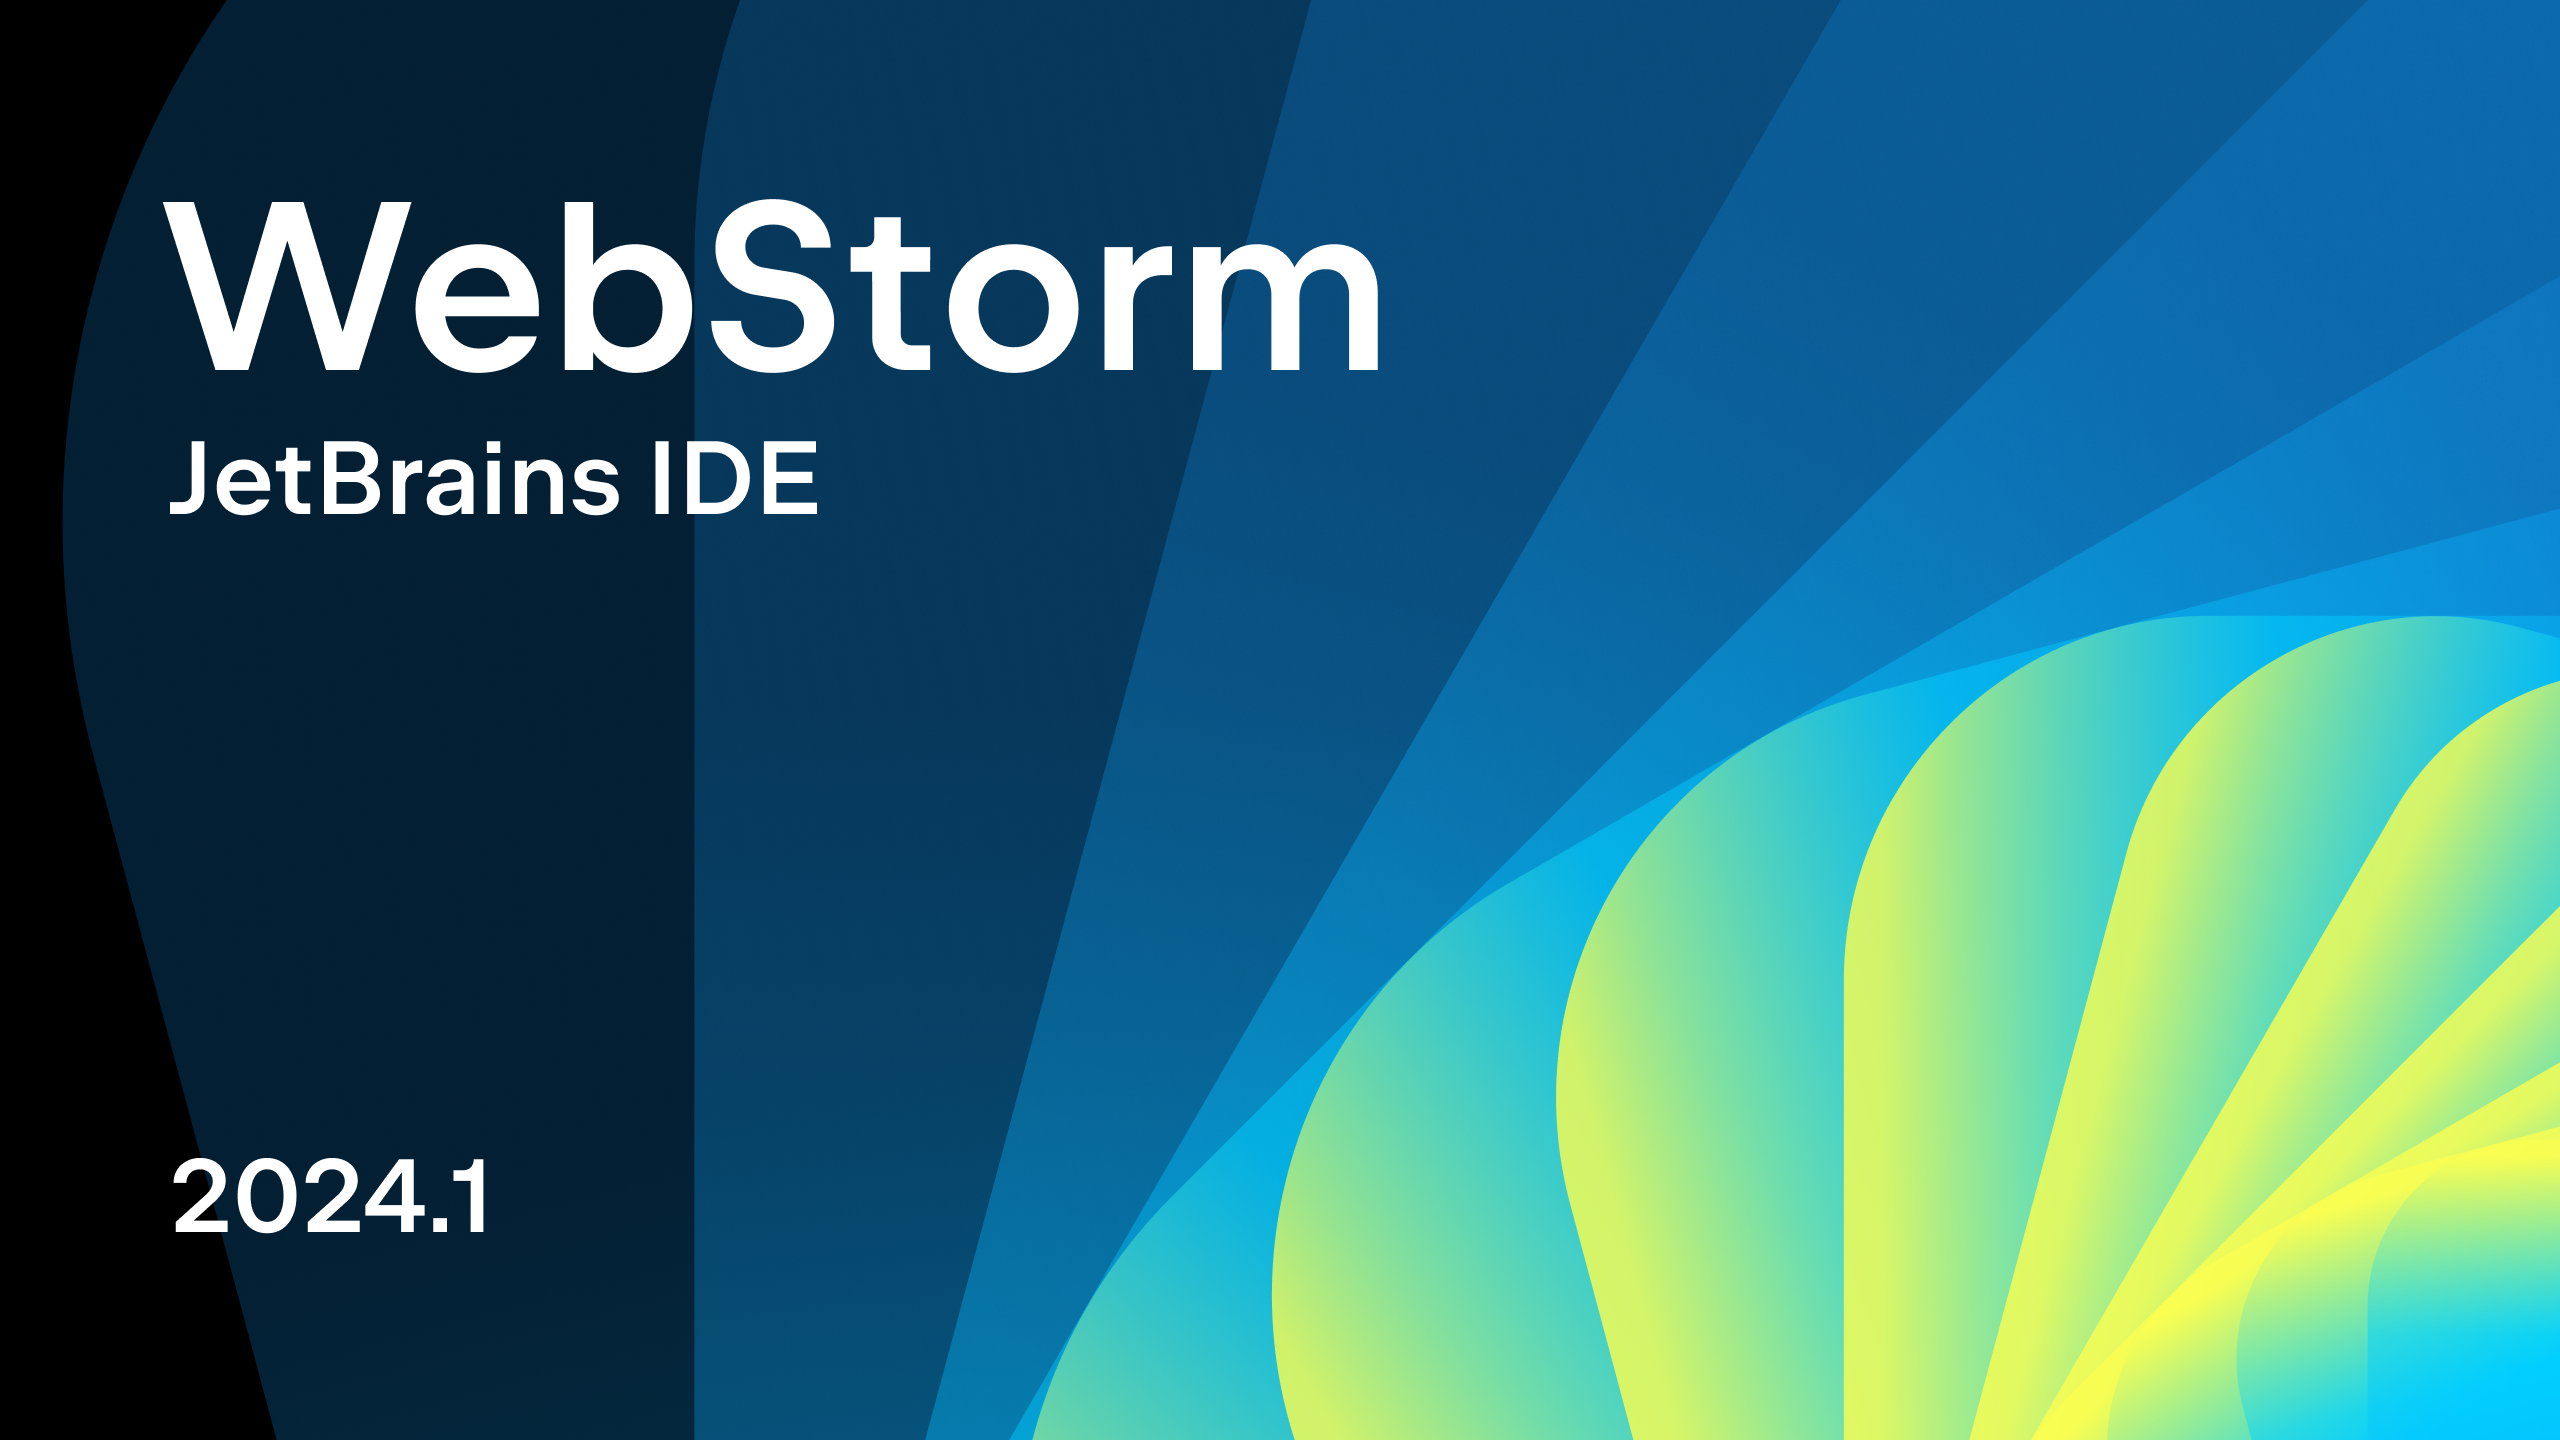 WebStorm 2024.1: Sticky Lines, Quick Documentation Improvements, Full
Line Completion, and More